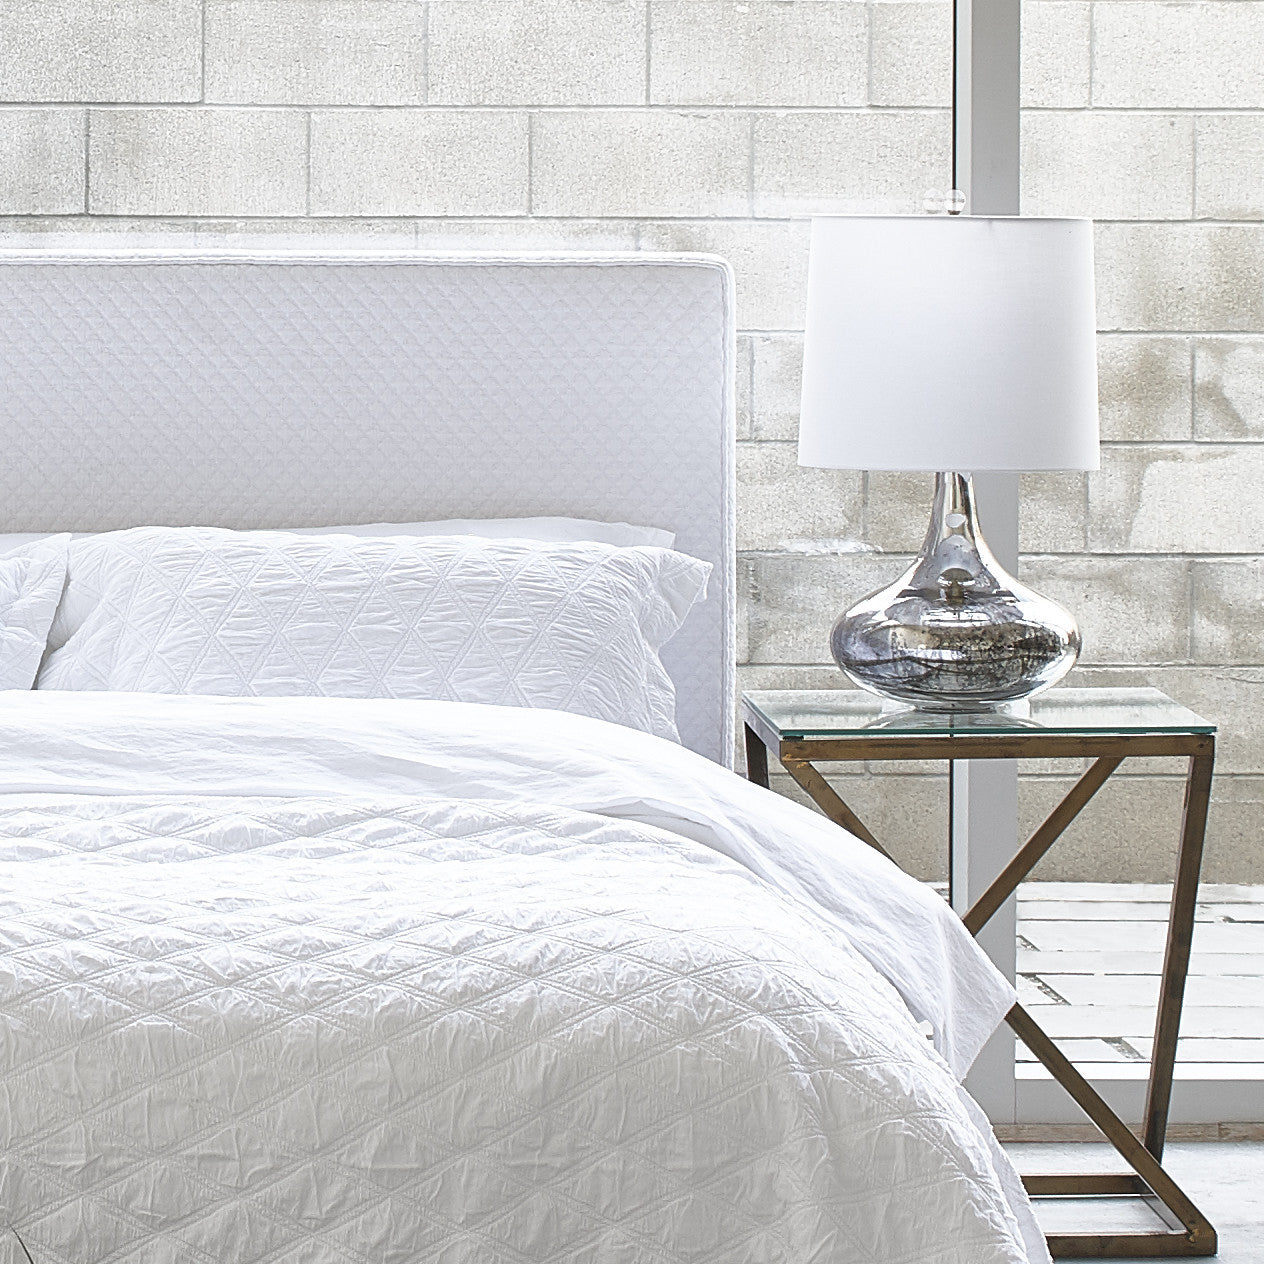 The 3 Questions to Ask Before Buying New Sheets